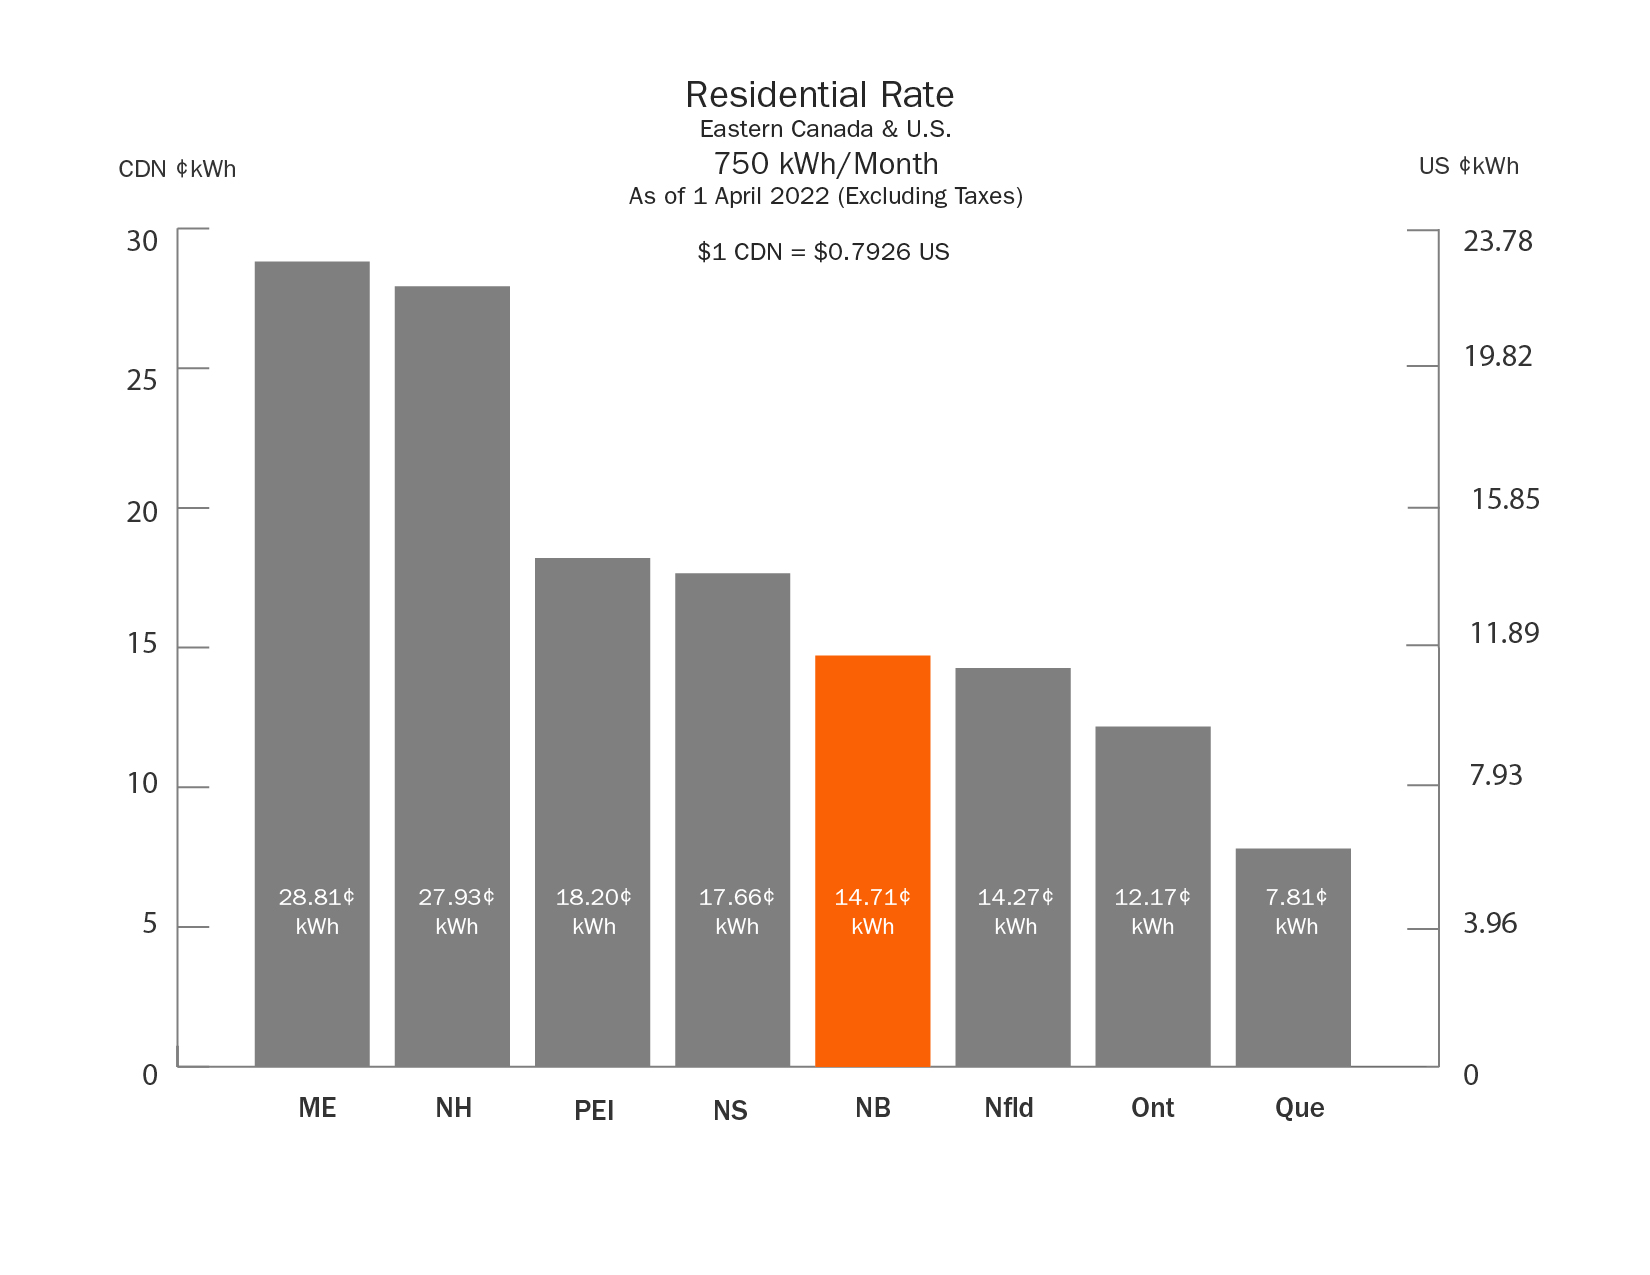 Residential Rate Chart 750 KWh/month